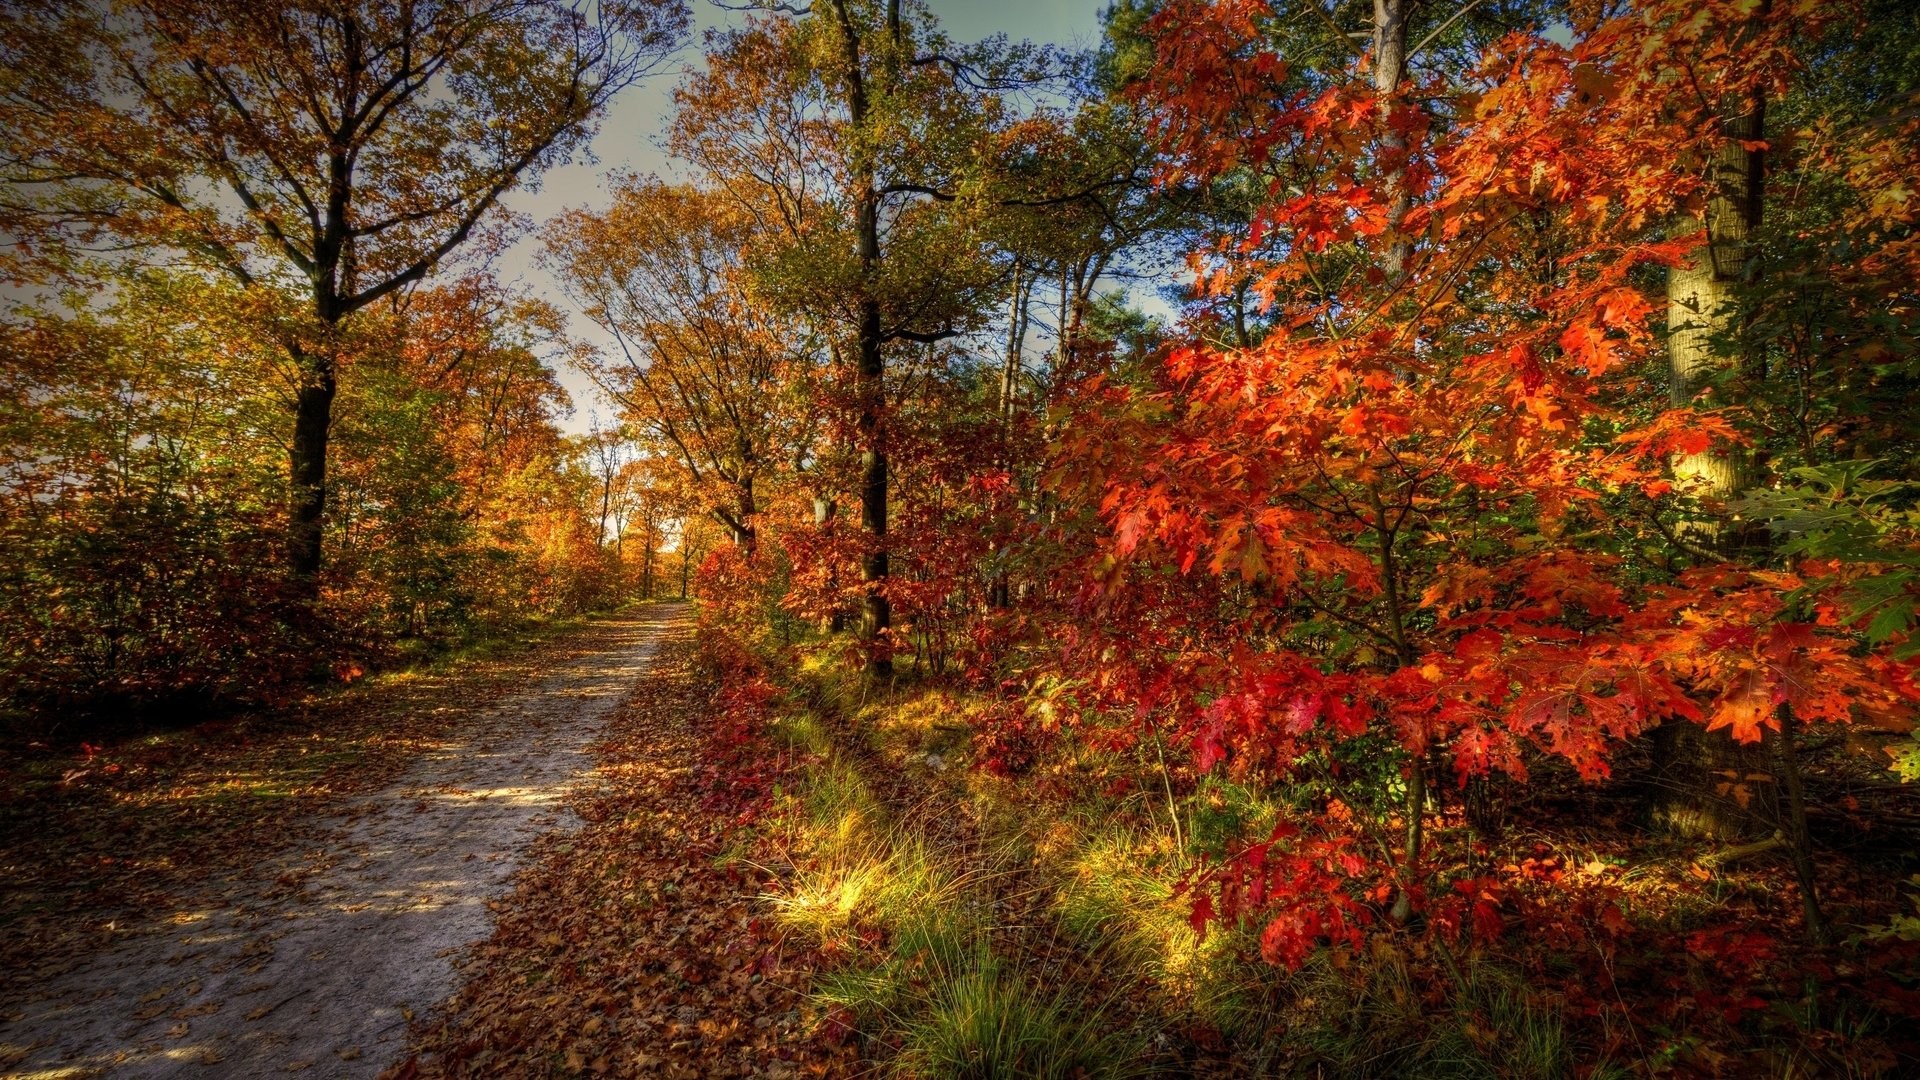 General 1920x1080 trees fall leaves fallen leaves nature outdoors path